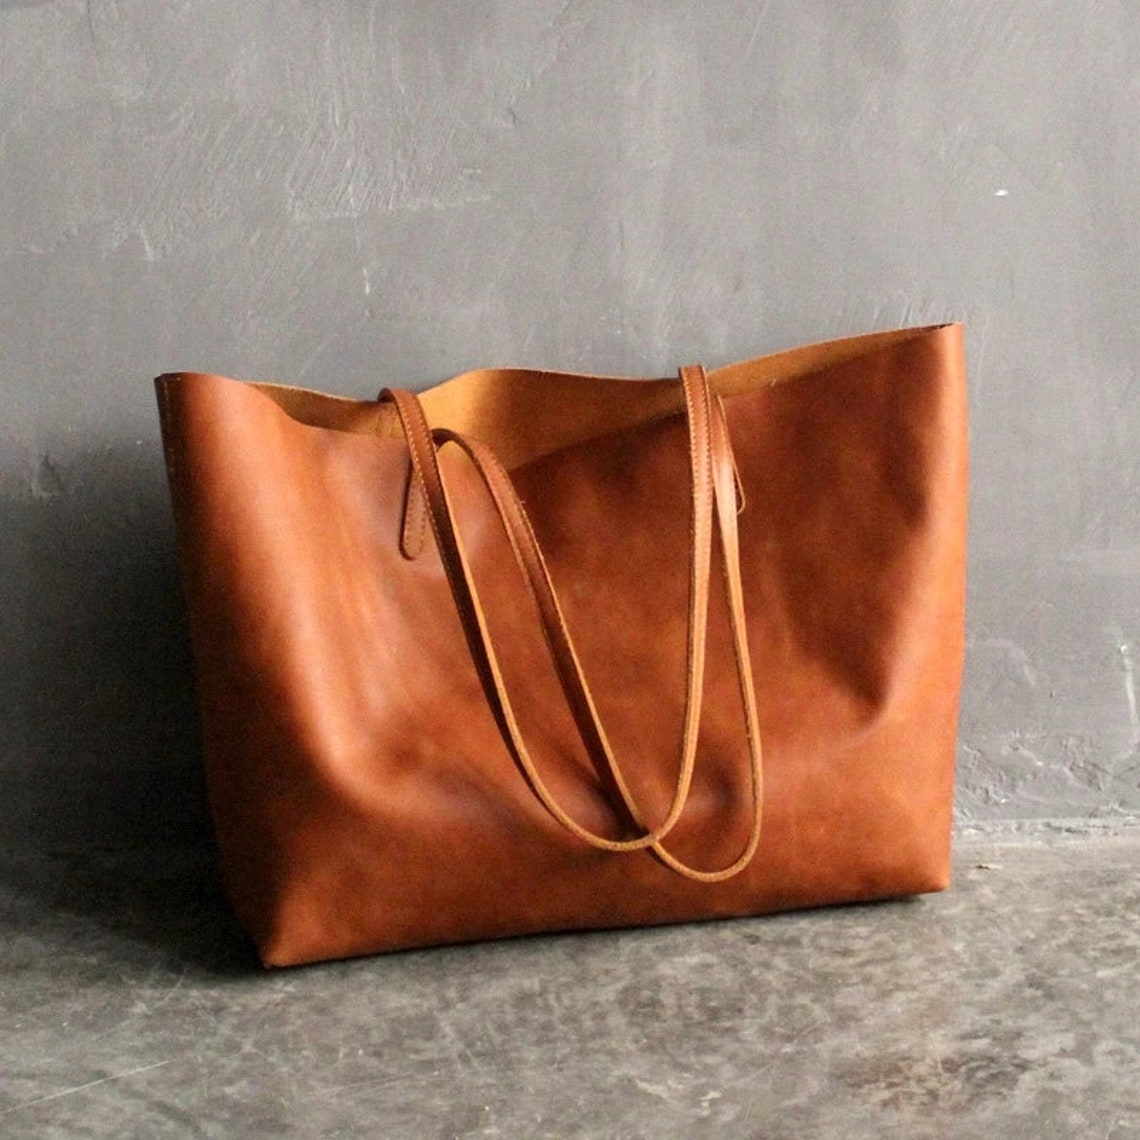 COGNAC LEATHER TOTE Bag, Slouchy Tote, Cognac Handbag for Women, Everyday  Bag, Women Leather Bag, Weekender Oversized Bag, Leather Purse - Etsy | Leather  bag women, Large leather tote bag, Large leather bag